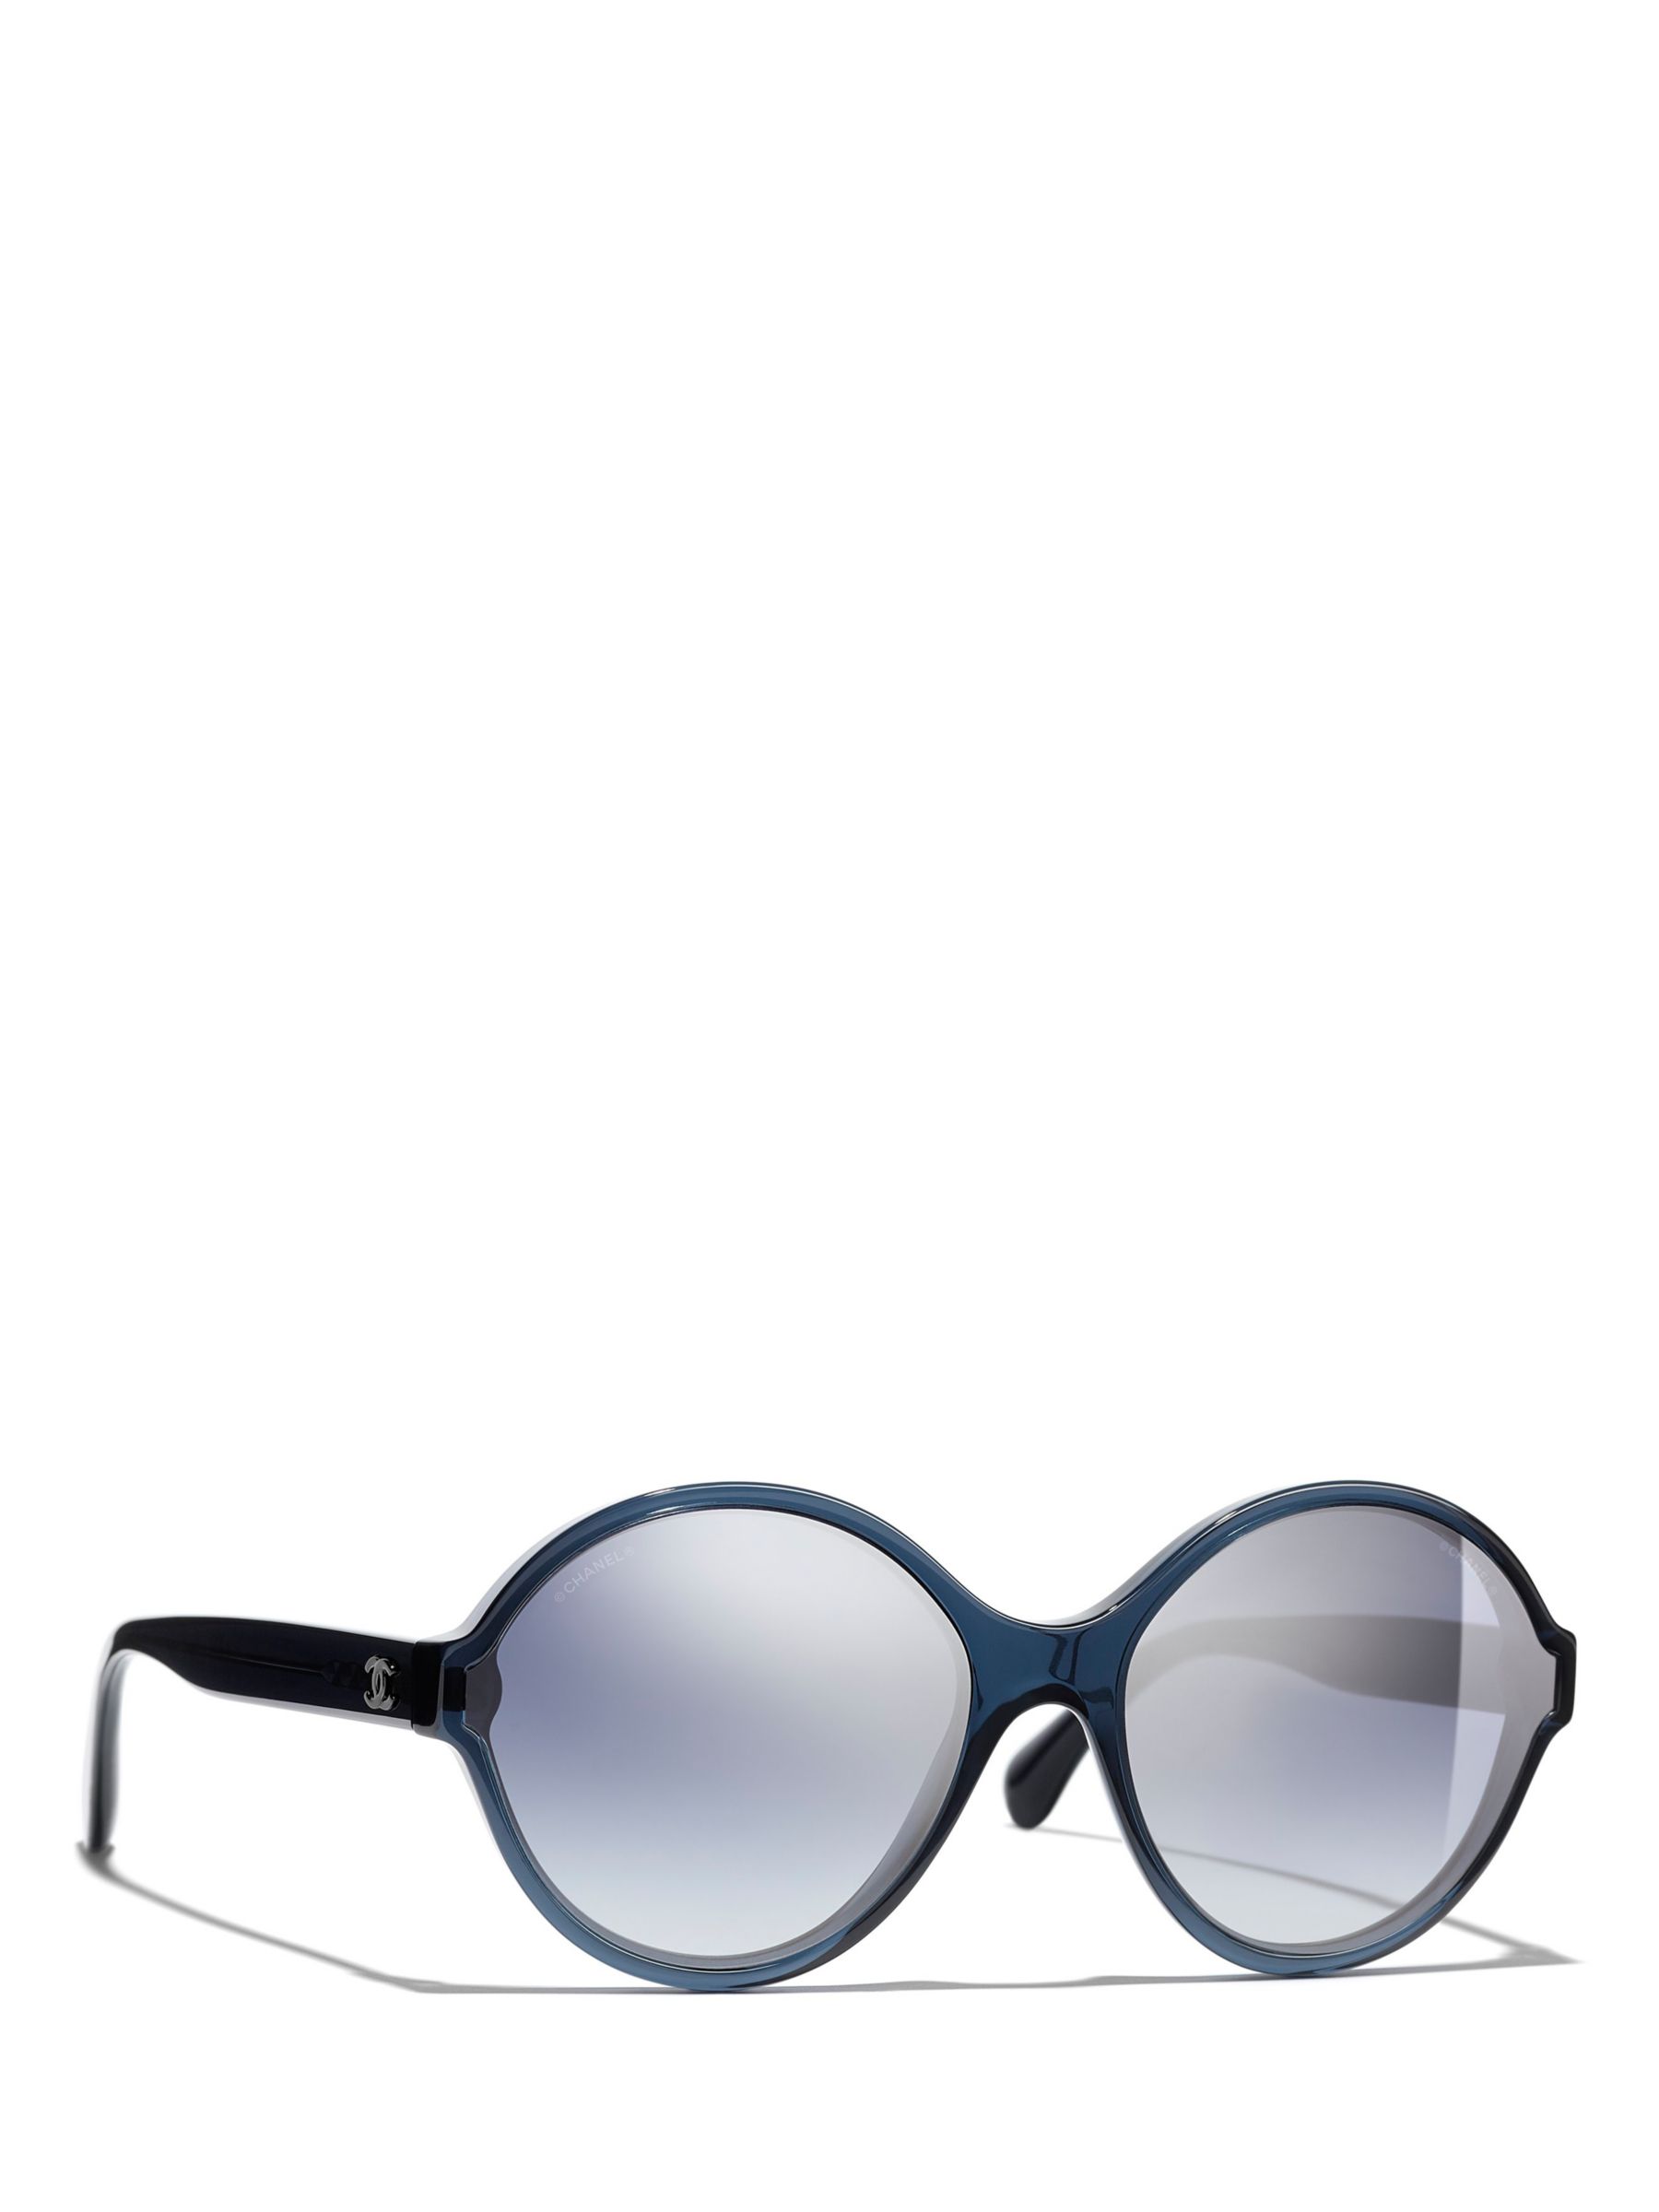 CHANEL Round Sunglasses CH5387 Blue/Clear Blue at John Lewis